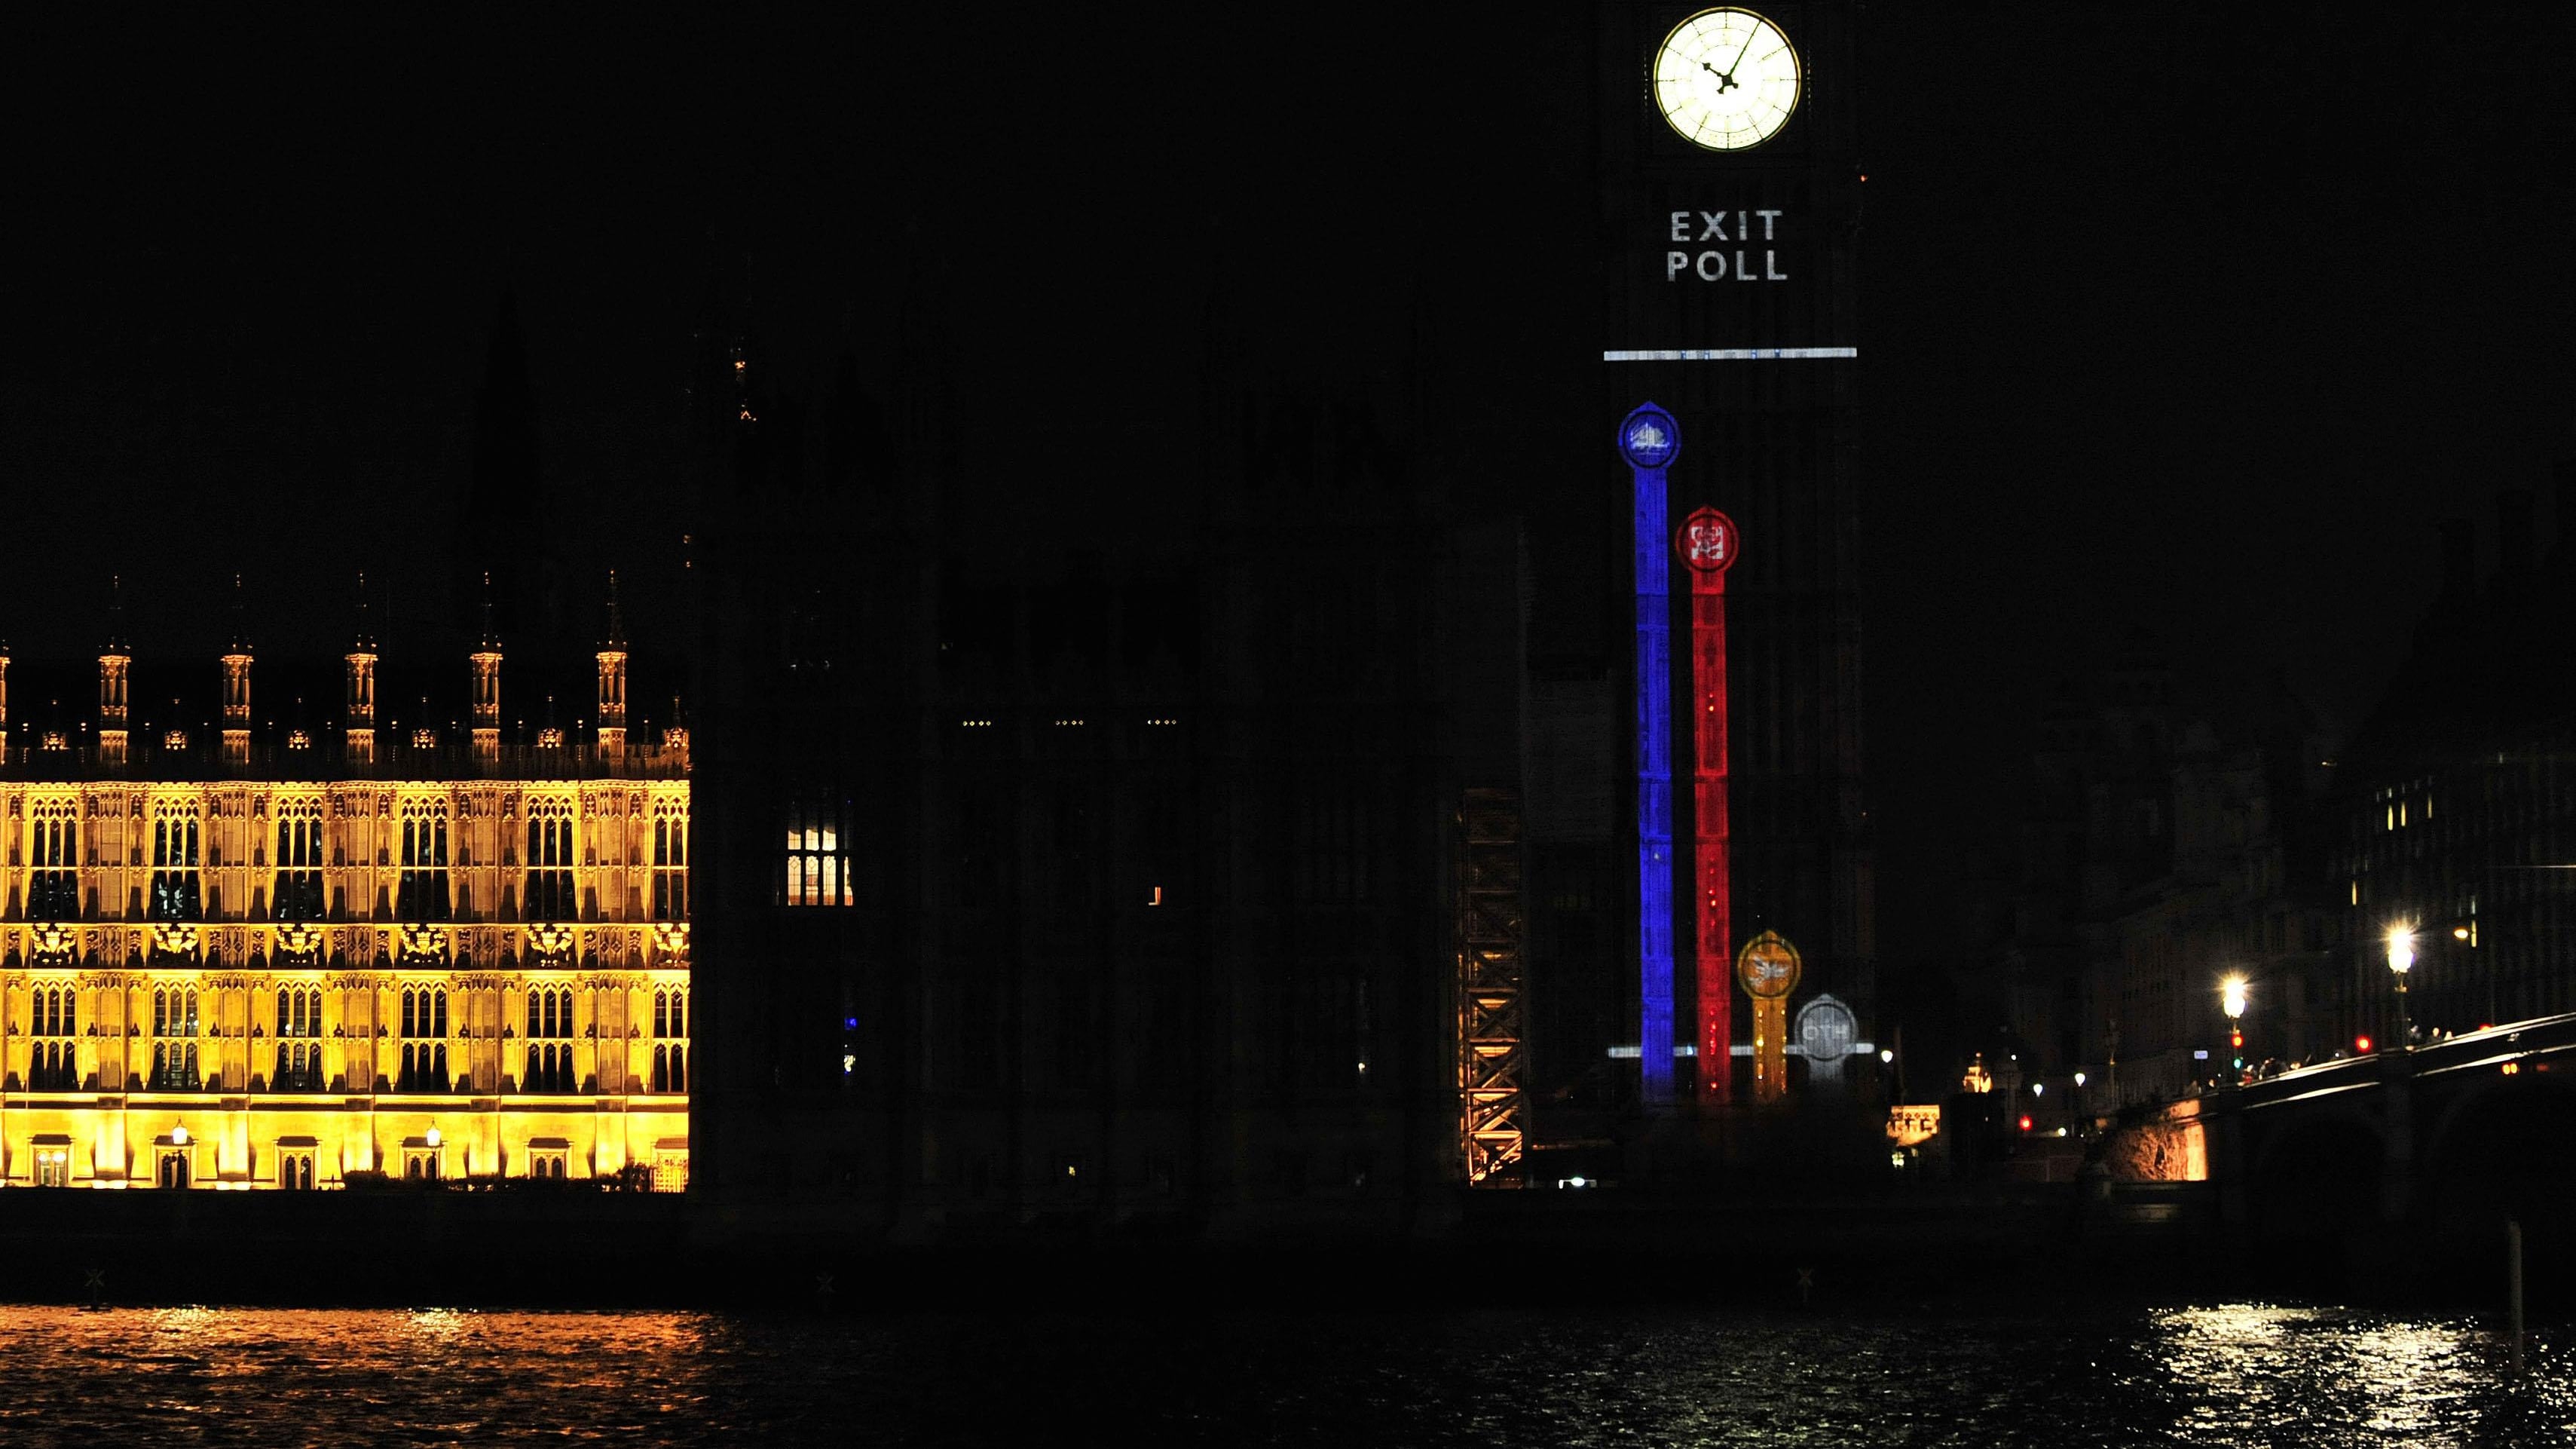 The exit poll is generally published shortly after 10pm on election day